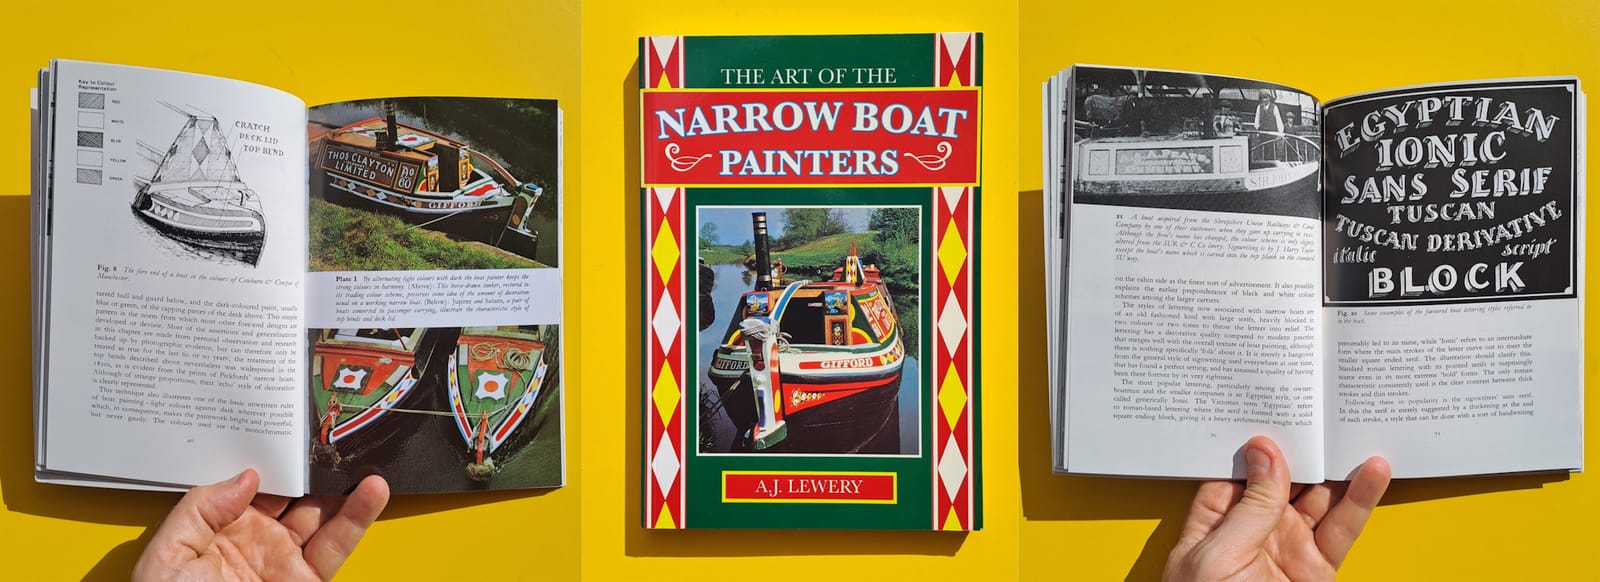 Triptych with the cover of a book in the centre, flanked by spreads made visible by a hand opening the book up. Each shows various elements of decoration and lettering on canal boats.